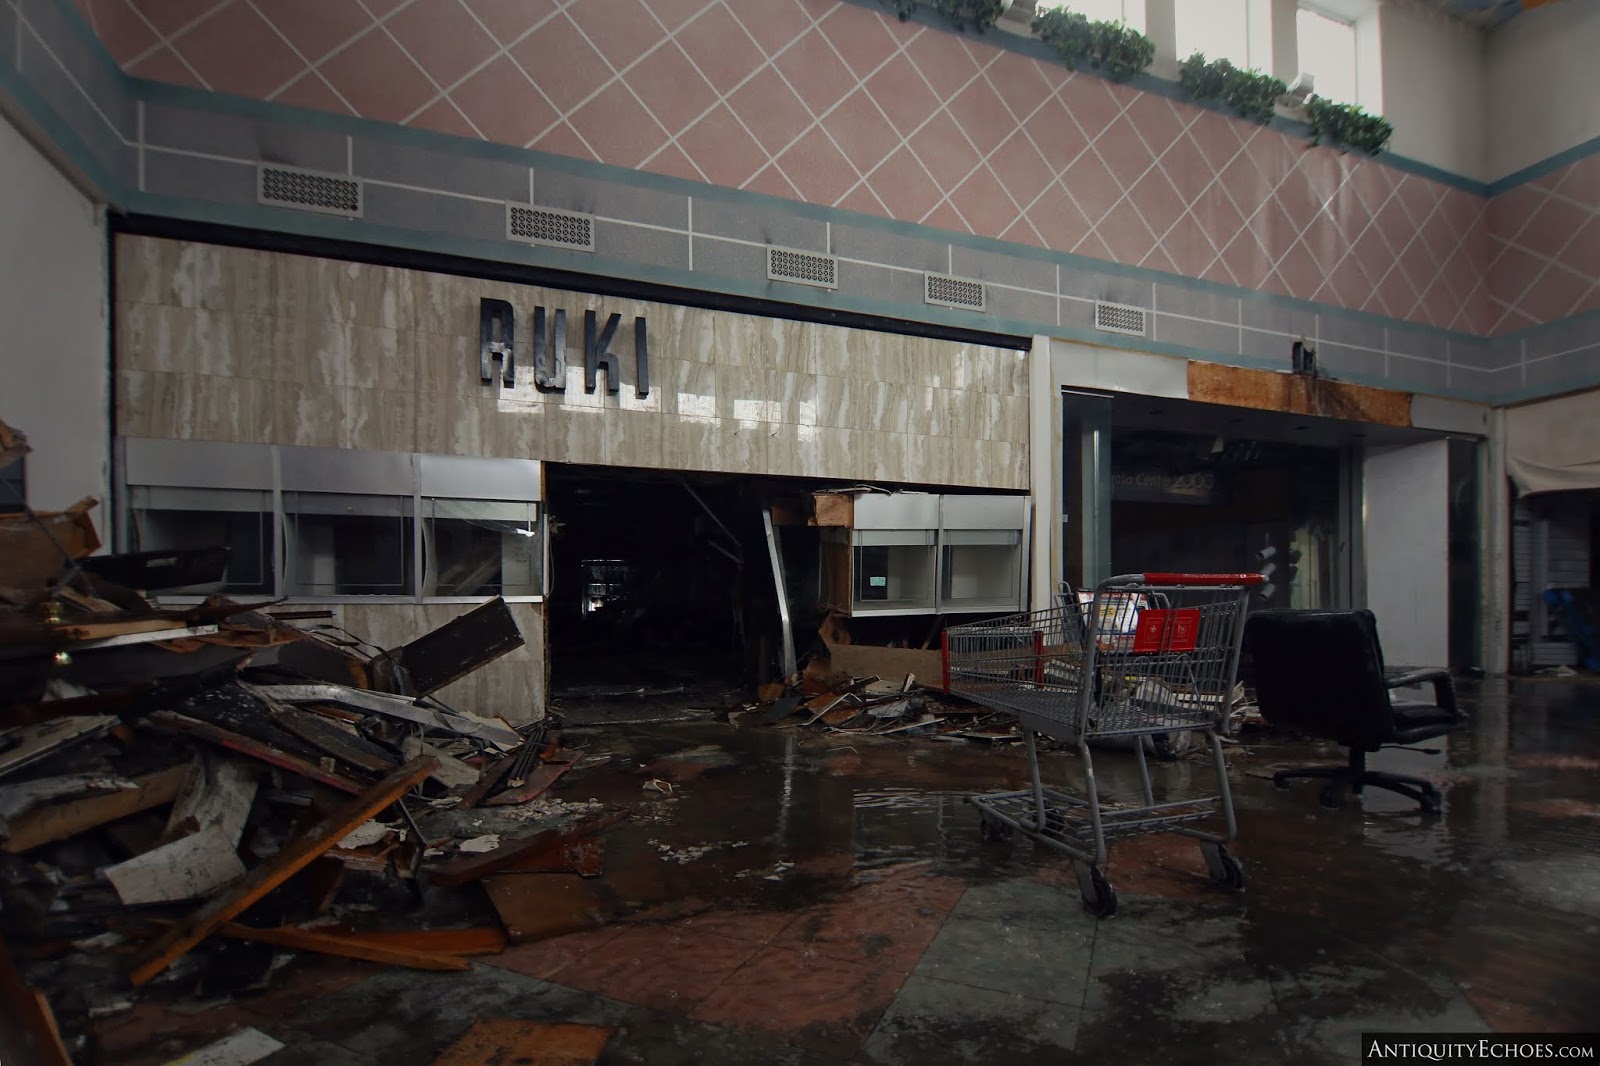 Wayne Hills Mall In New Jersey Is Now An Abandoned Relic